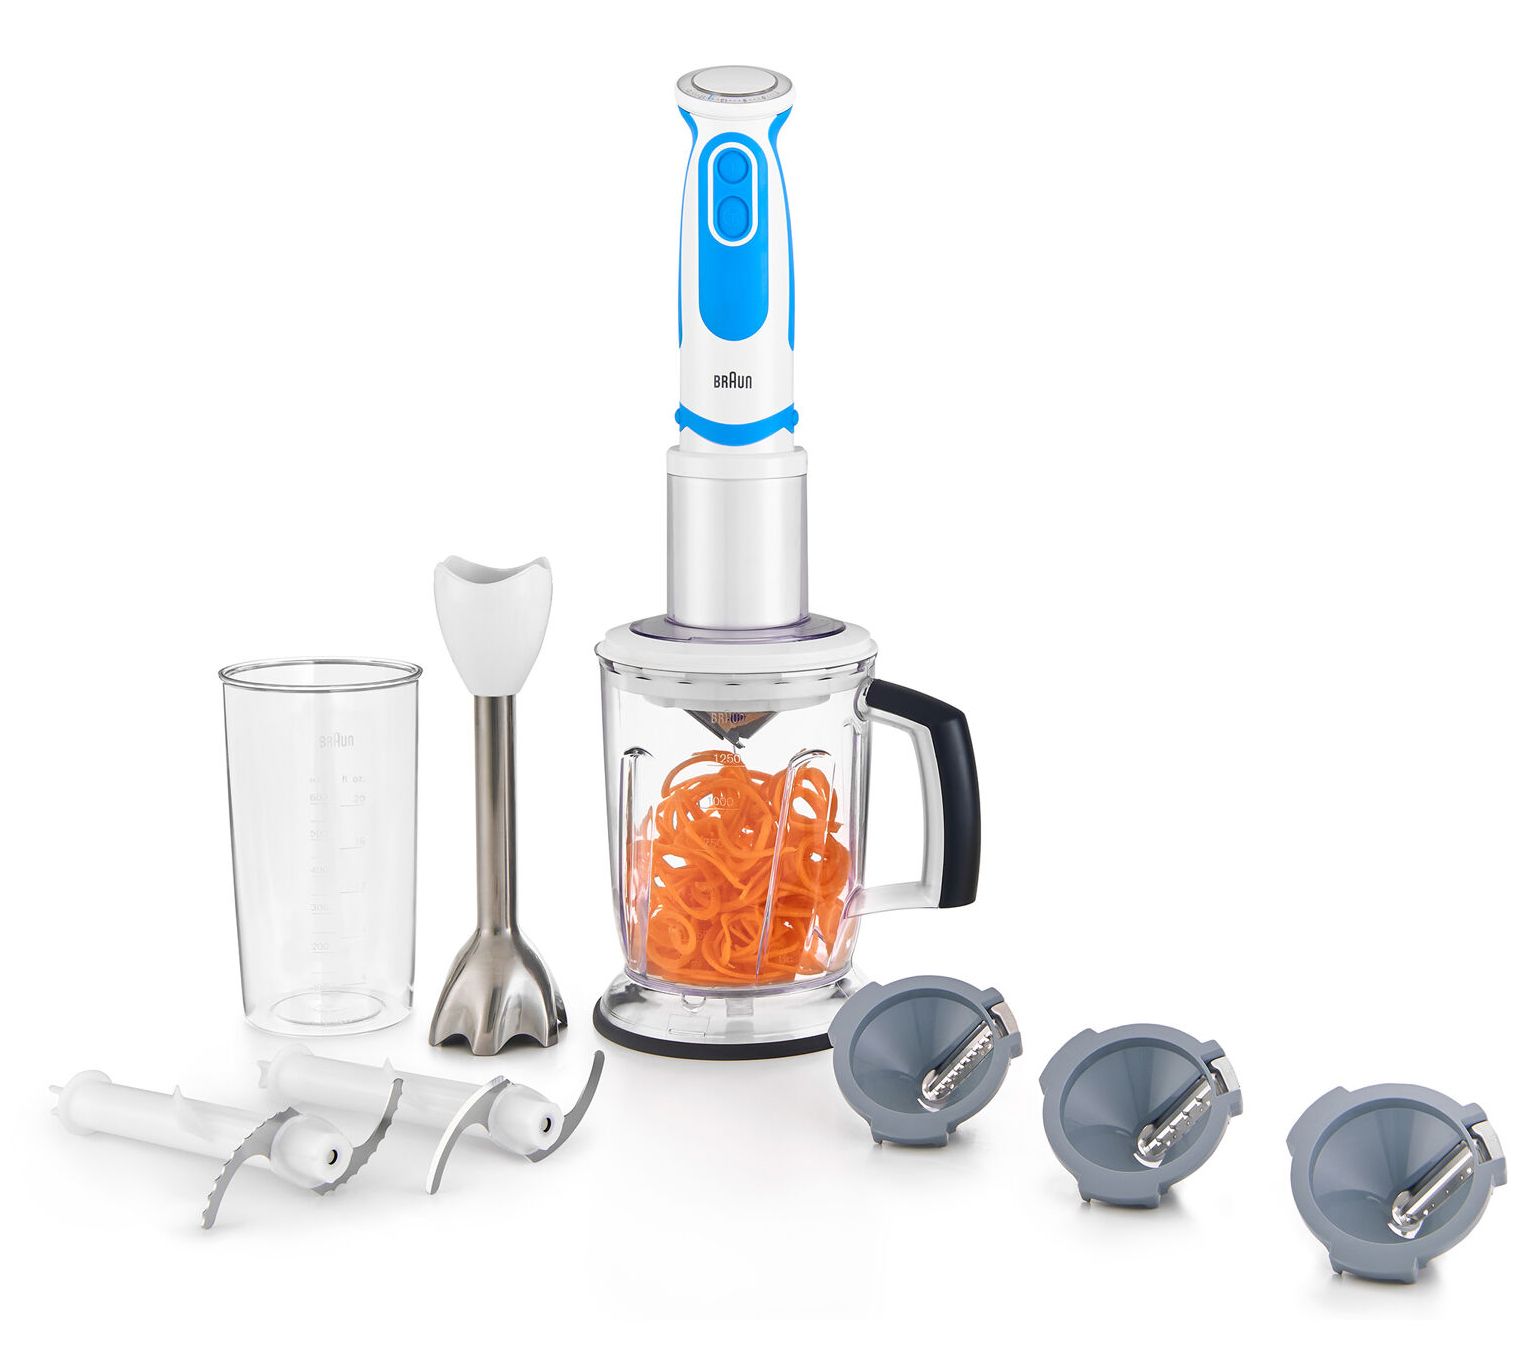 Braun 6-Cup Food Processor Attachment for MultiQuick Hand Blenders